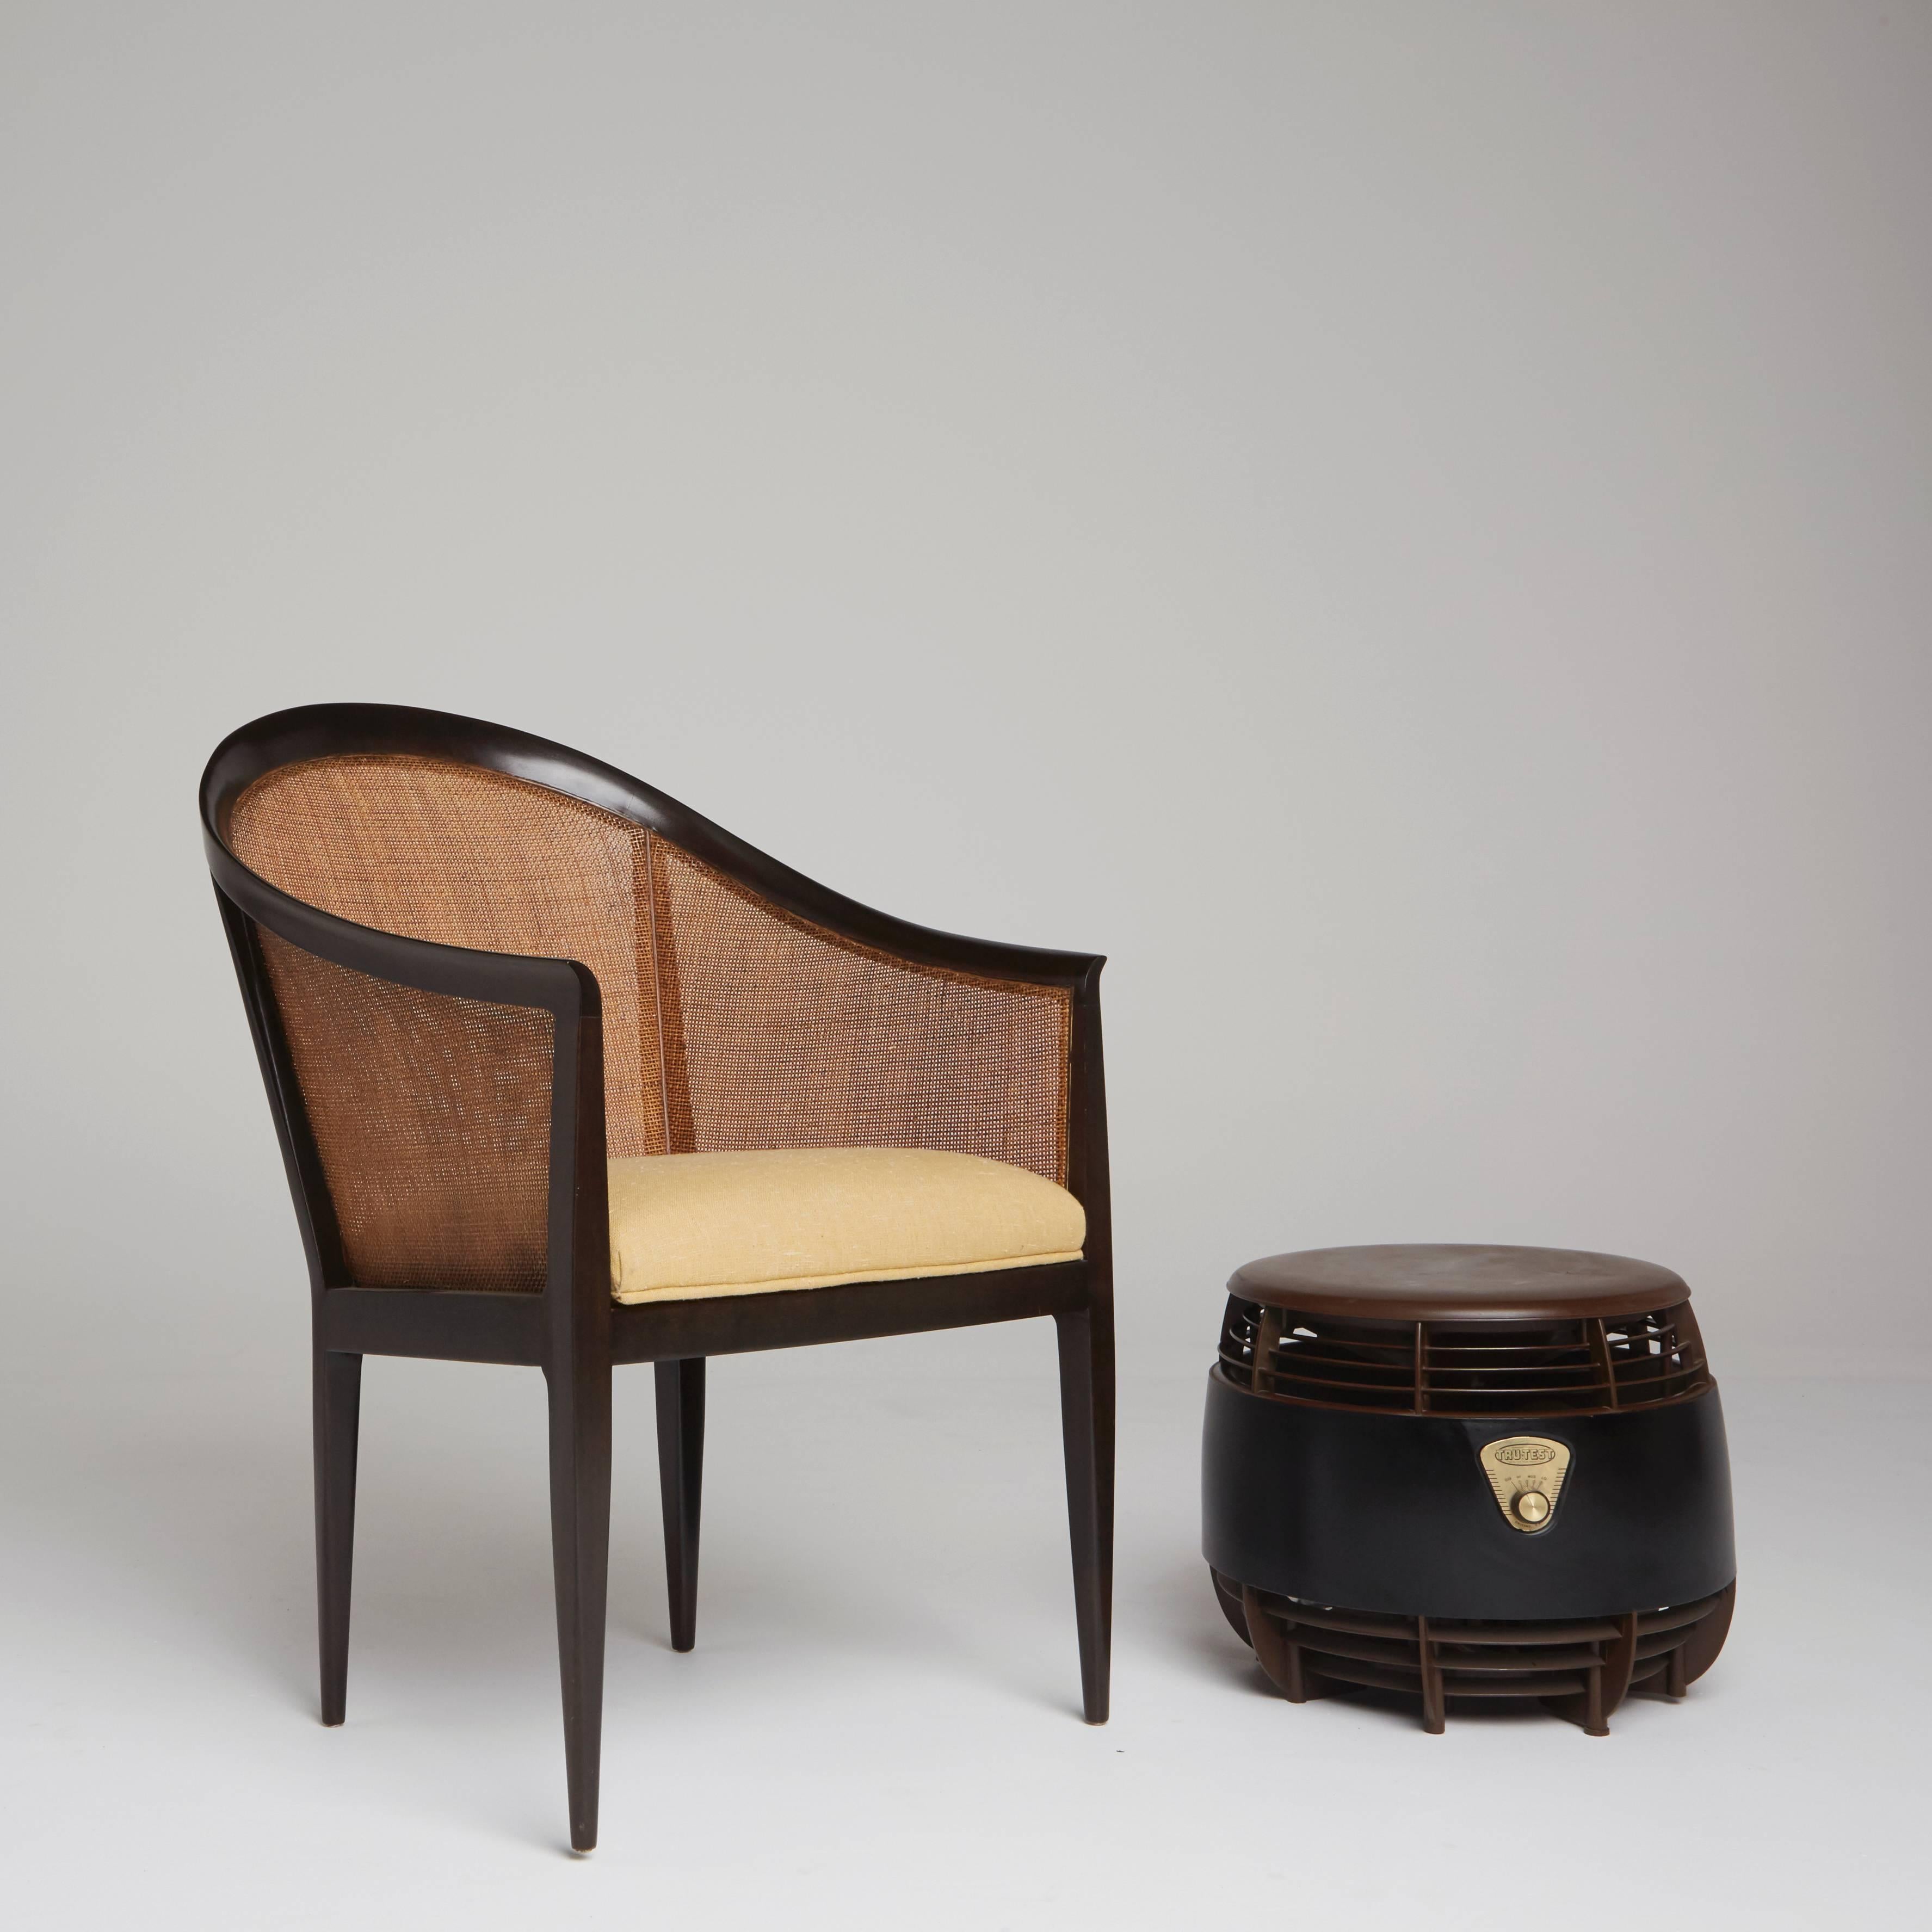 Kipp Stewart designed this elegant and sophisticated armchair in the 1960s for influential American manufacturer, Directional Furniture. The curvature of the ebonized walnut frame borders each chair's impeccable caning, and the cream and soft yellow